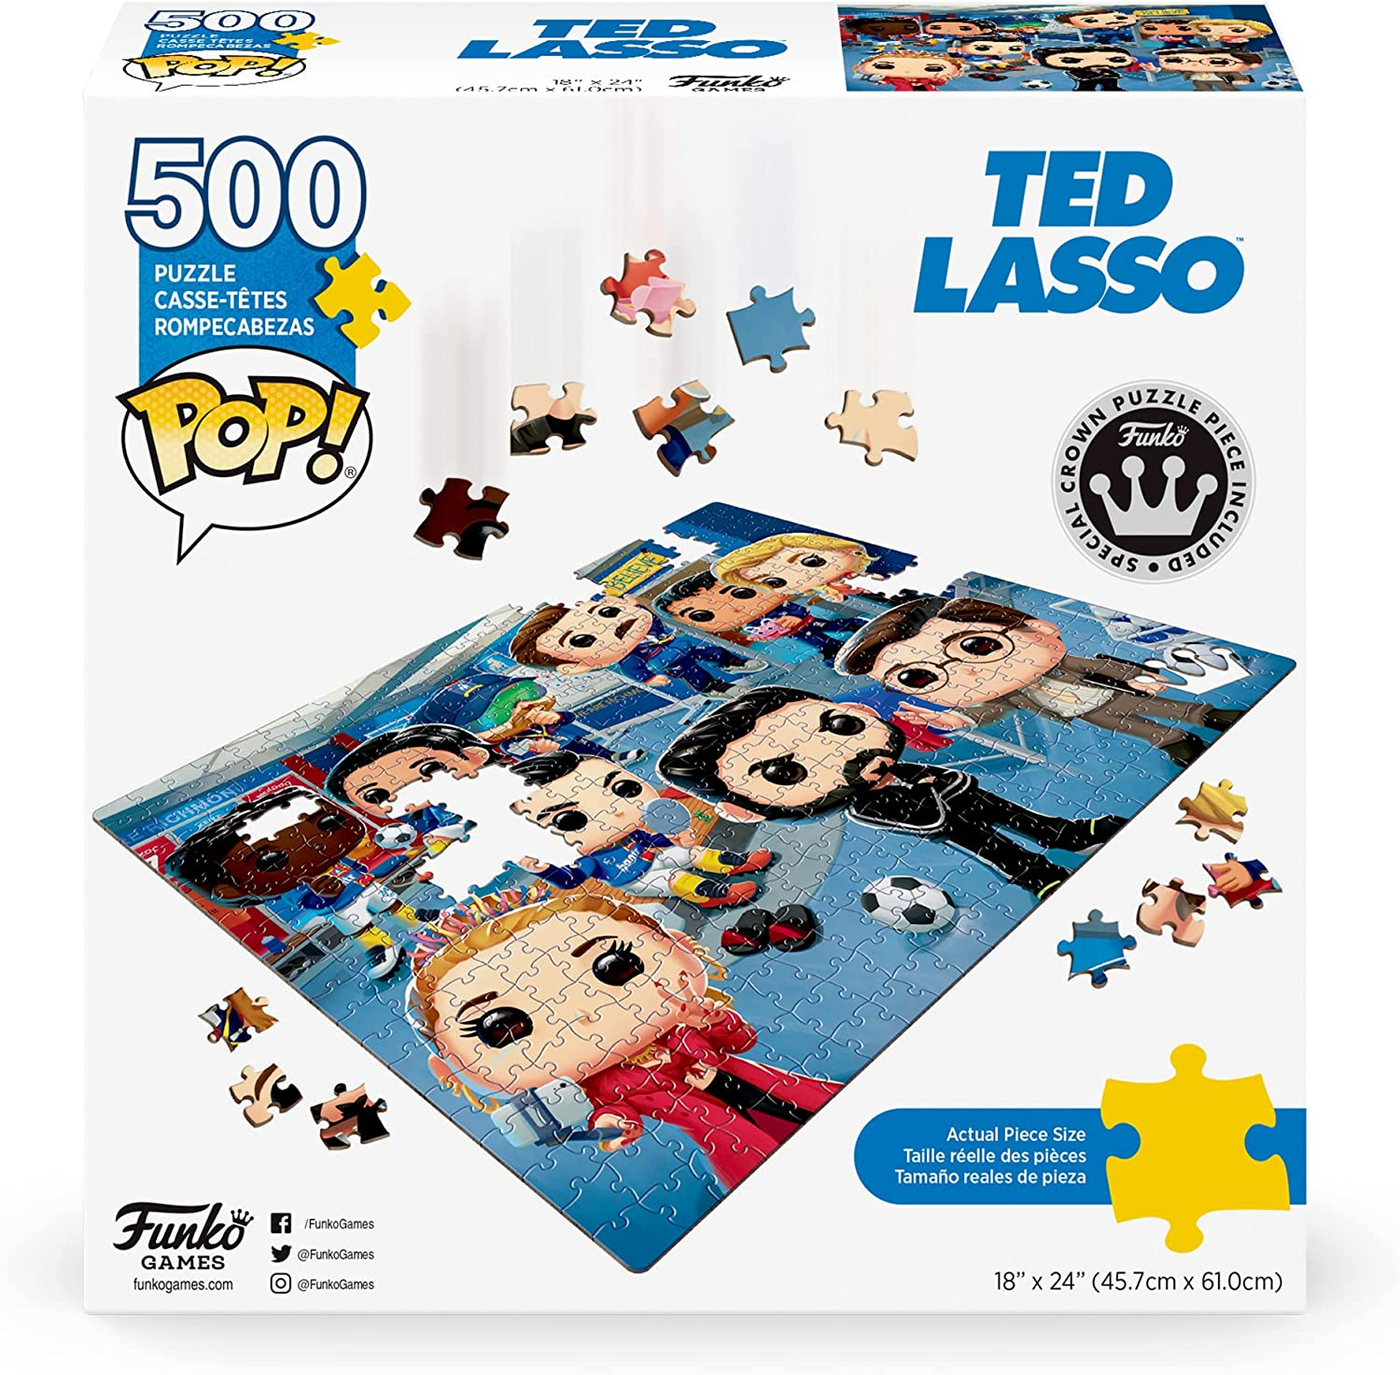 Ted Lasso 500 Piece Jigsaw Puzzle by Funko